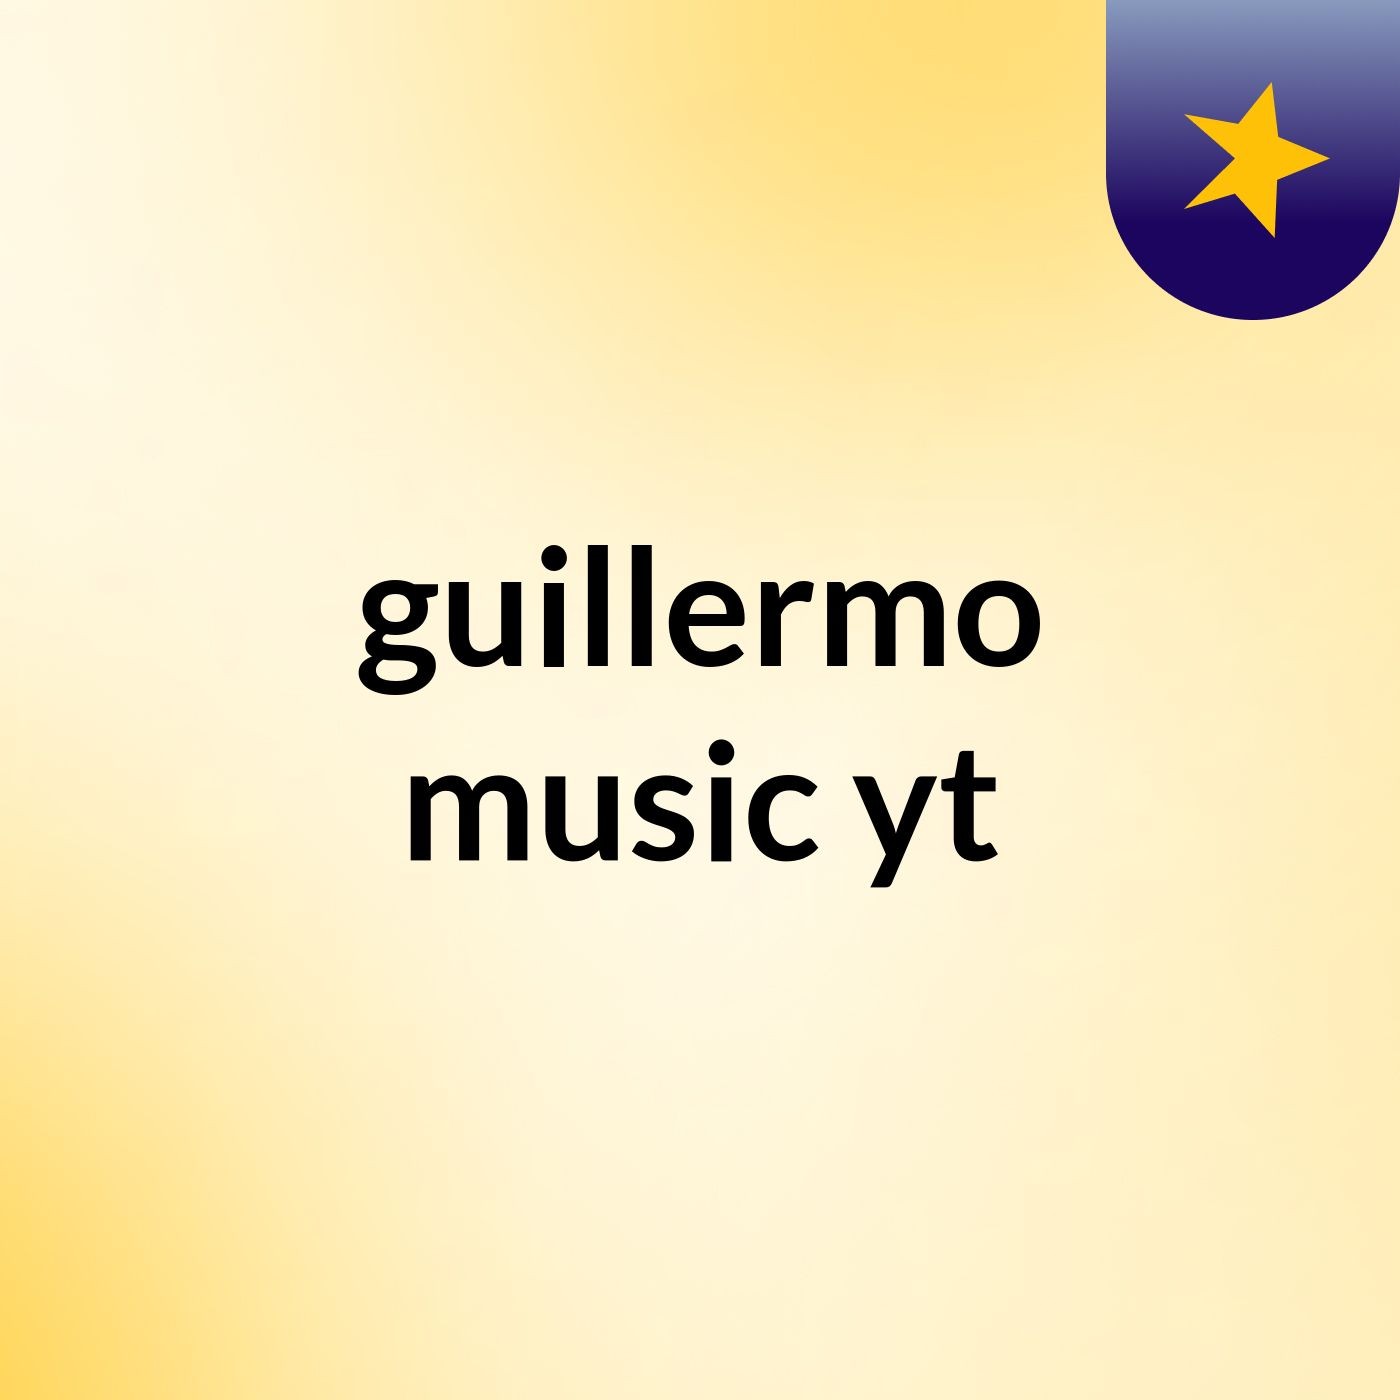 guillermo music yt